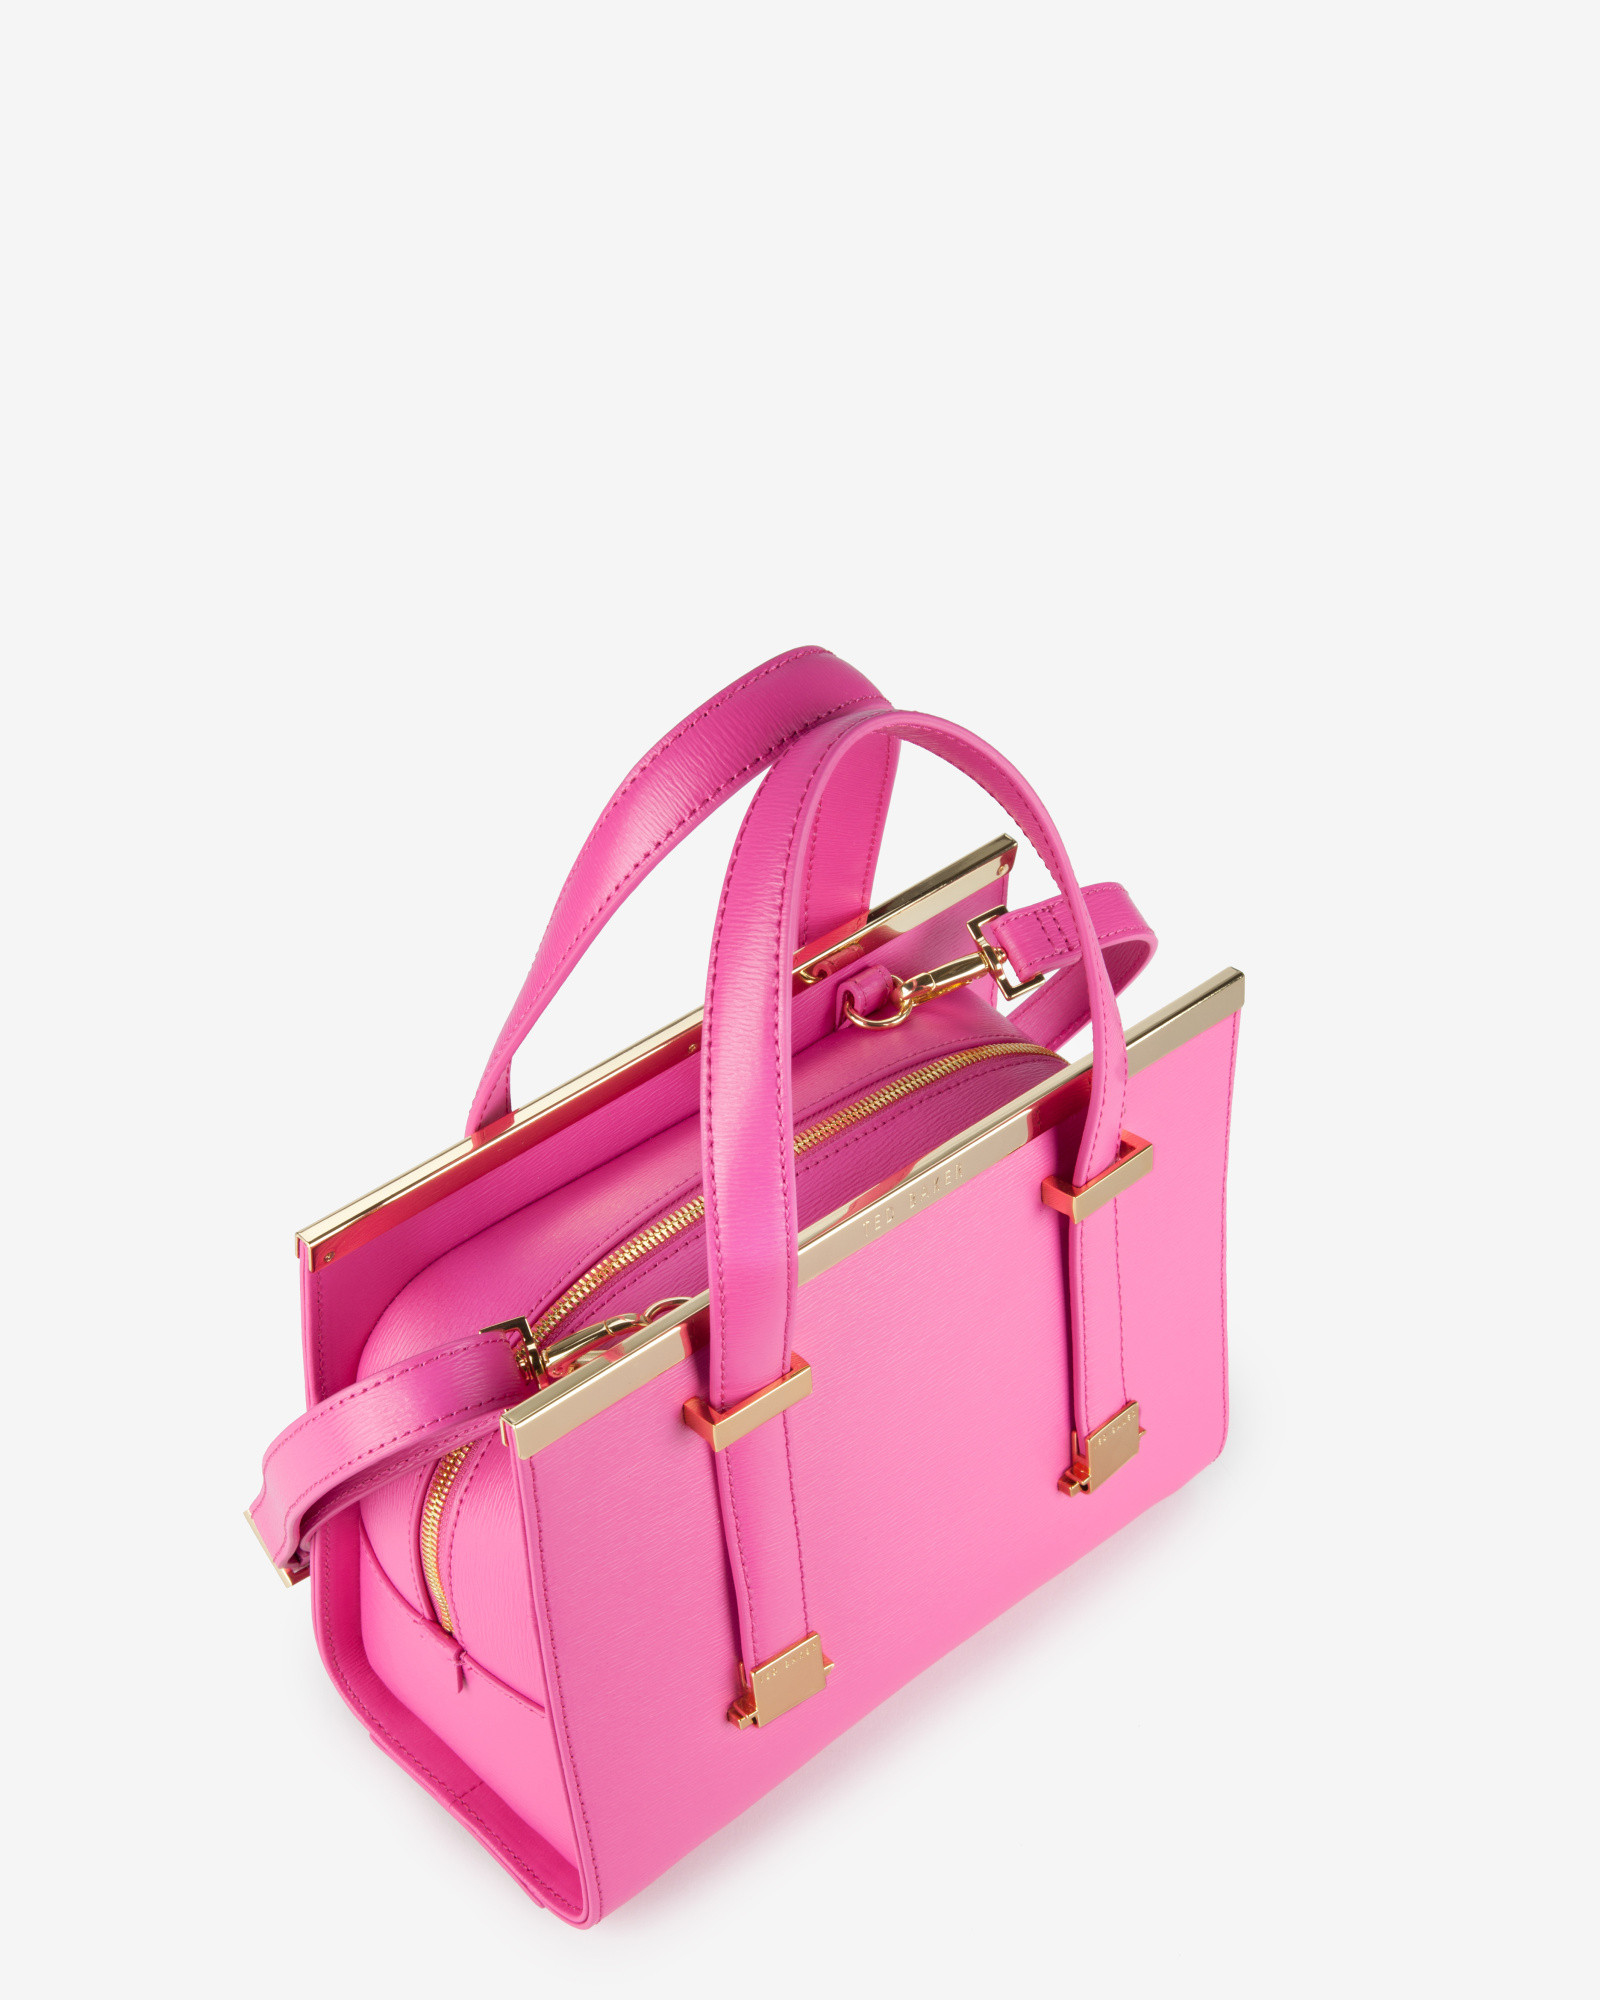 Ted baker Small Crosshatch Leather Tote Bag in Pink (Bright Pink) | Lyst